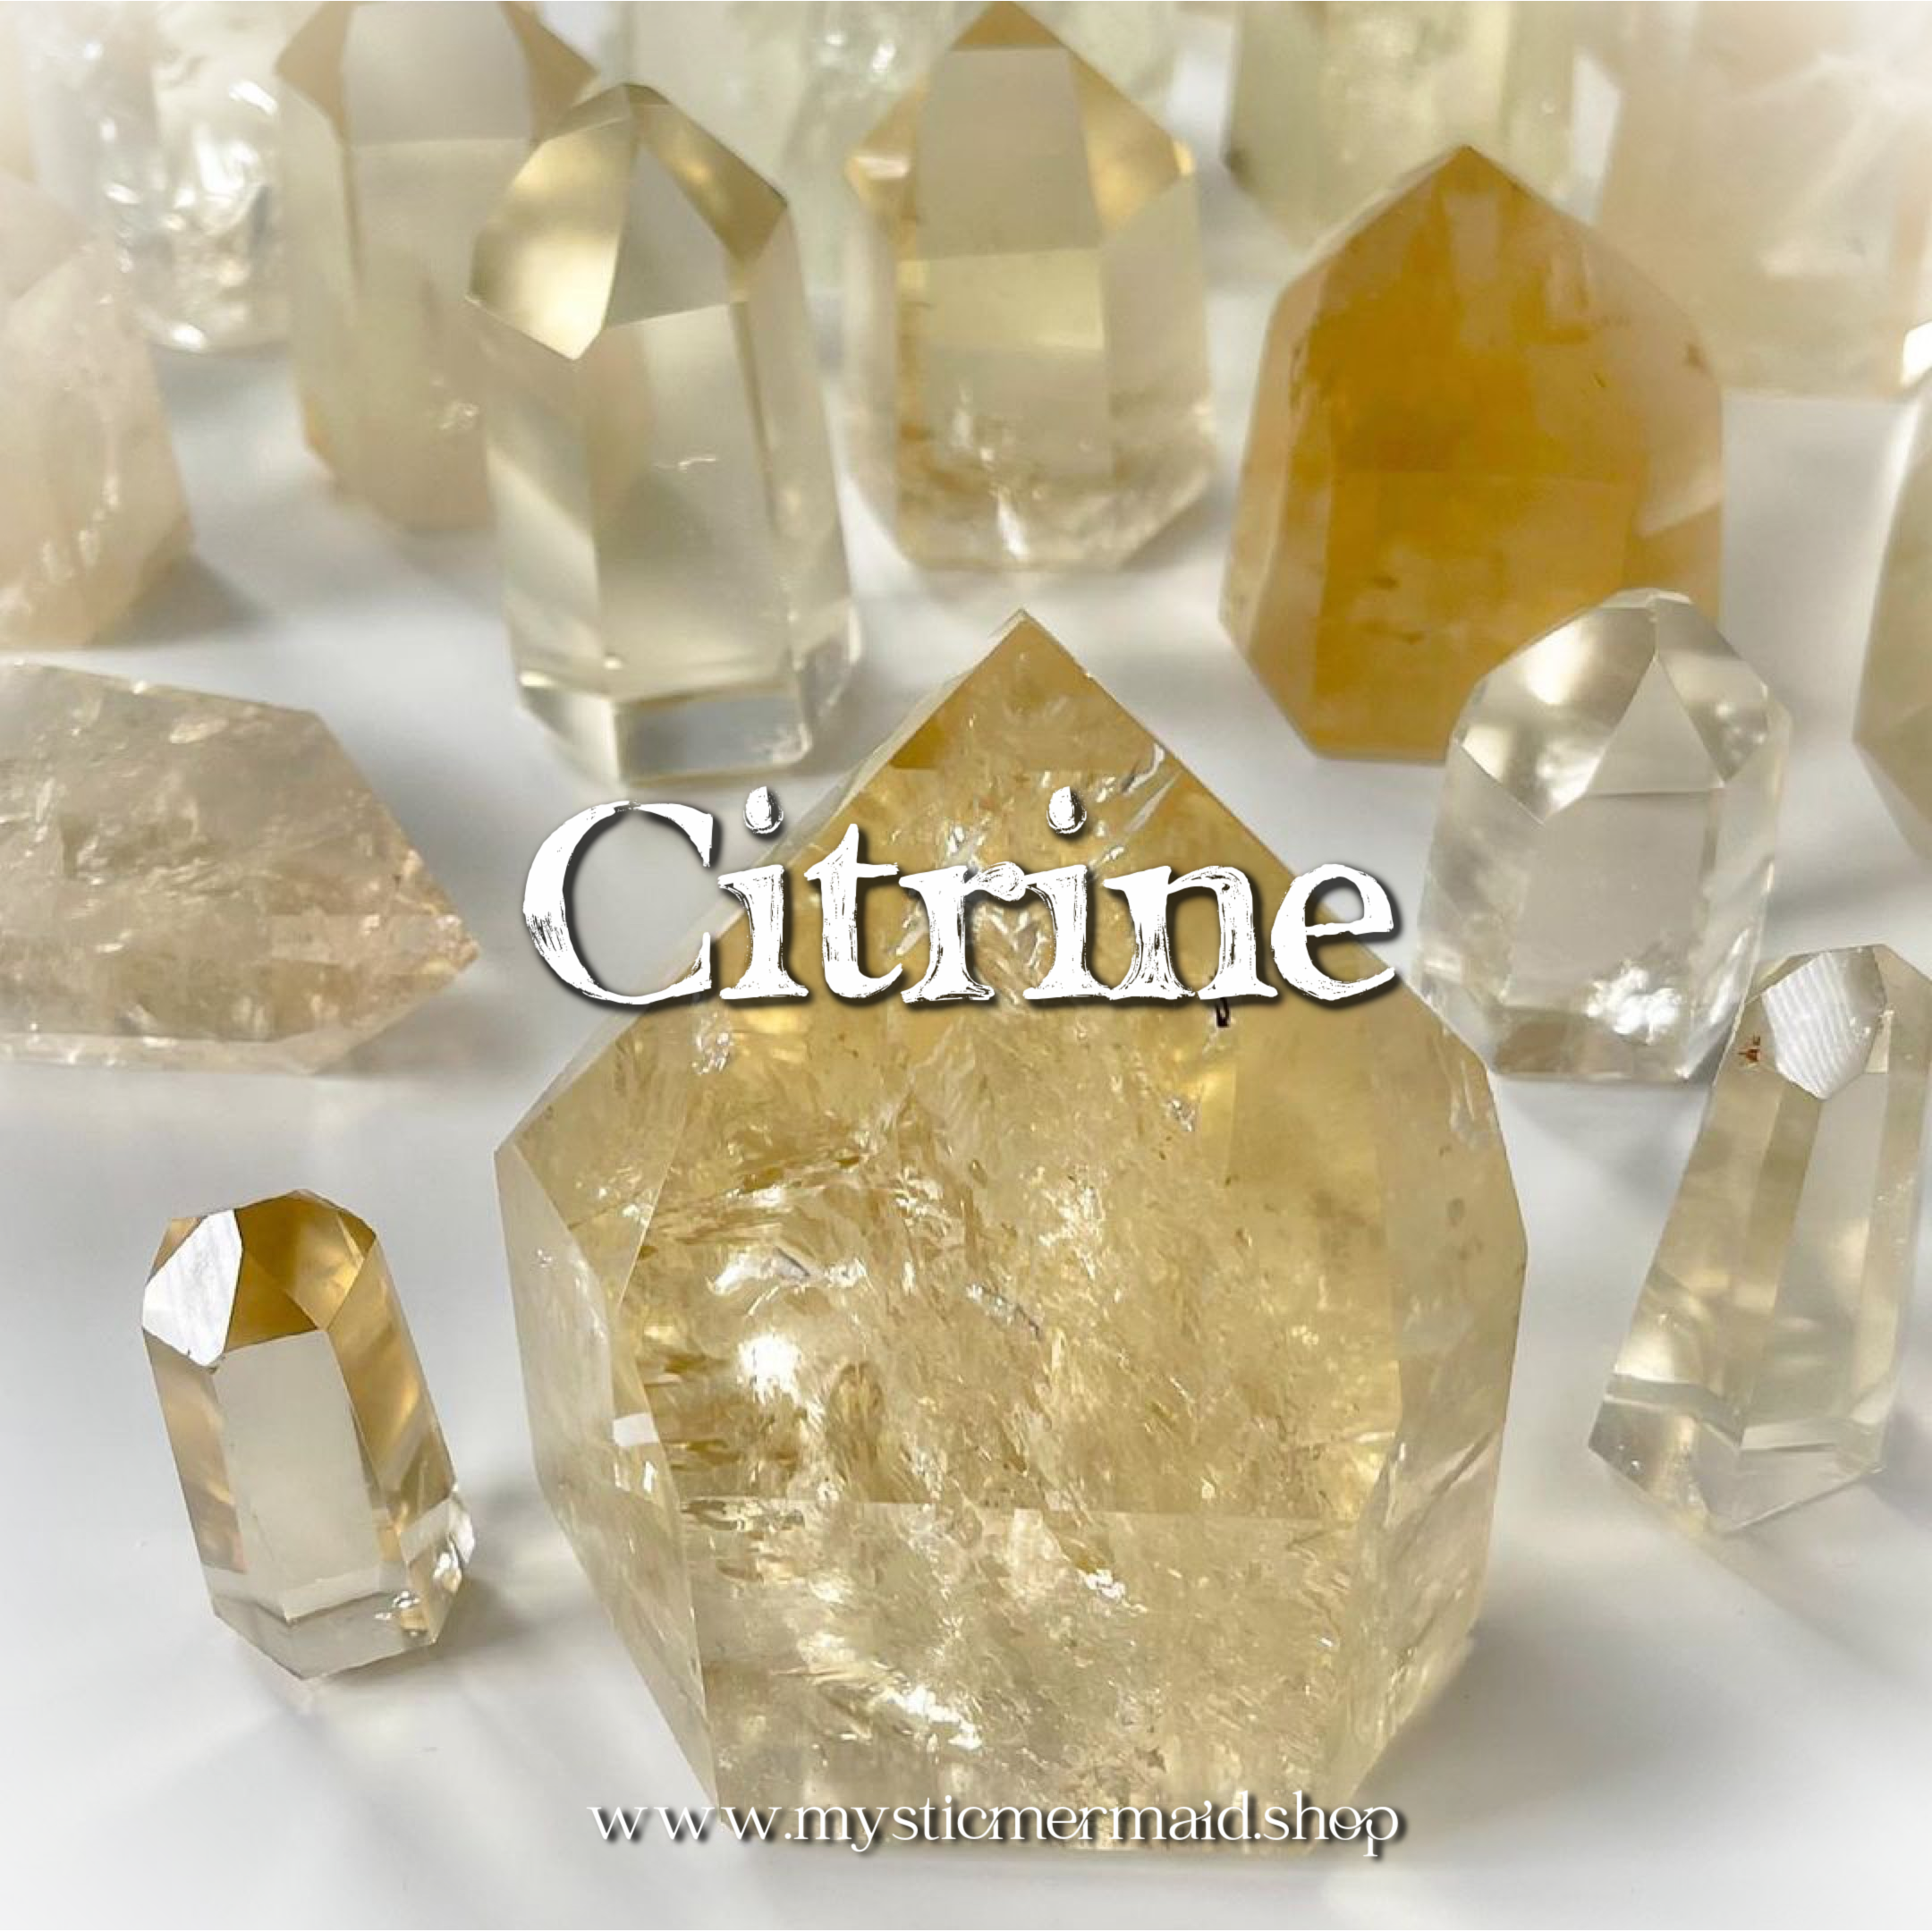 Citrine available from Mystic Mermaid Metaphysical Crystal Properties